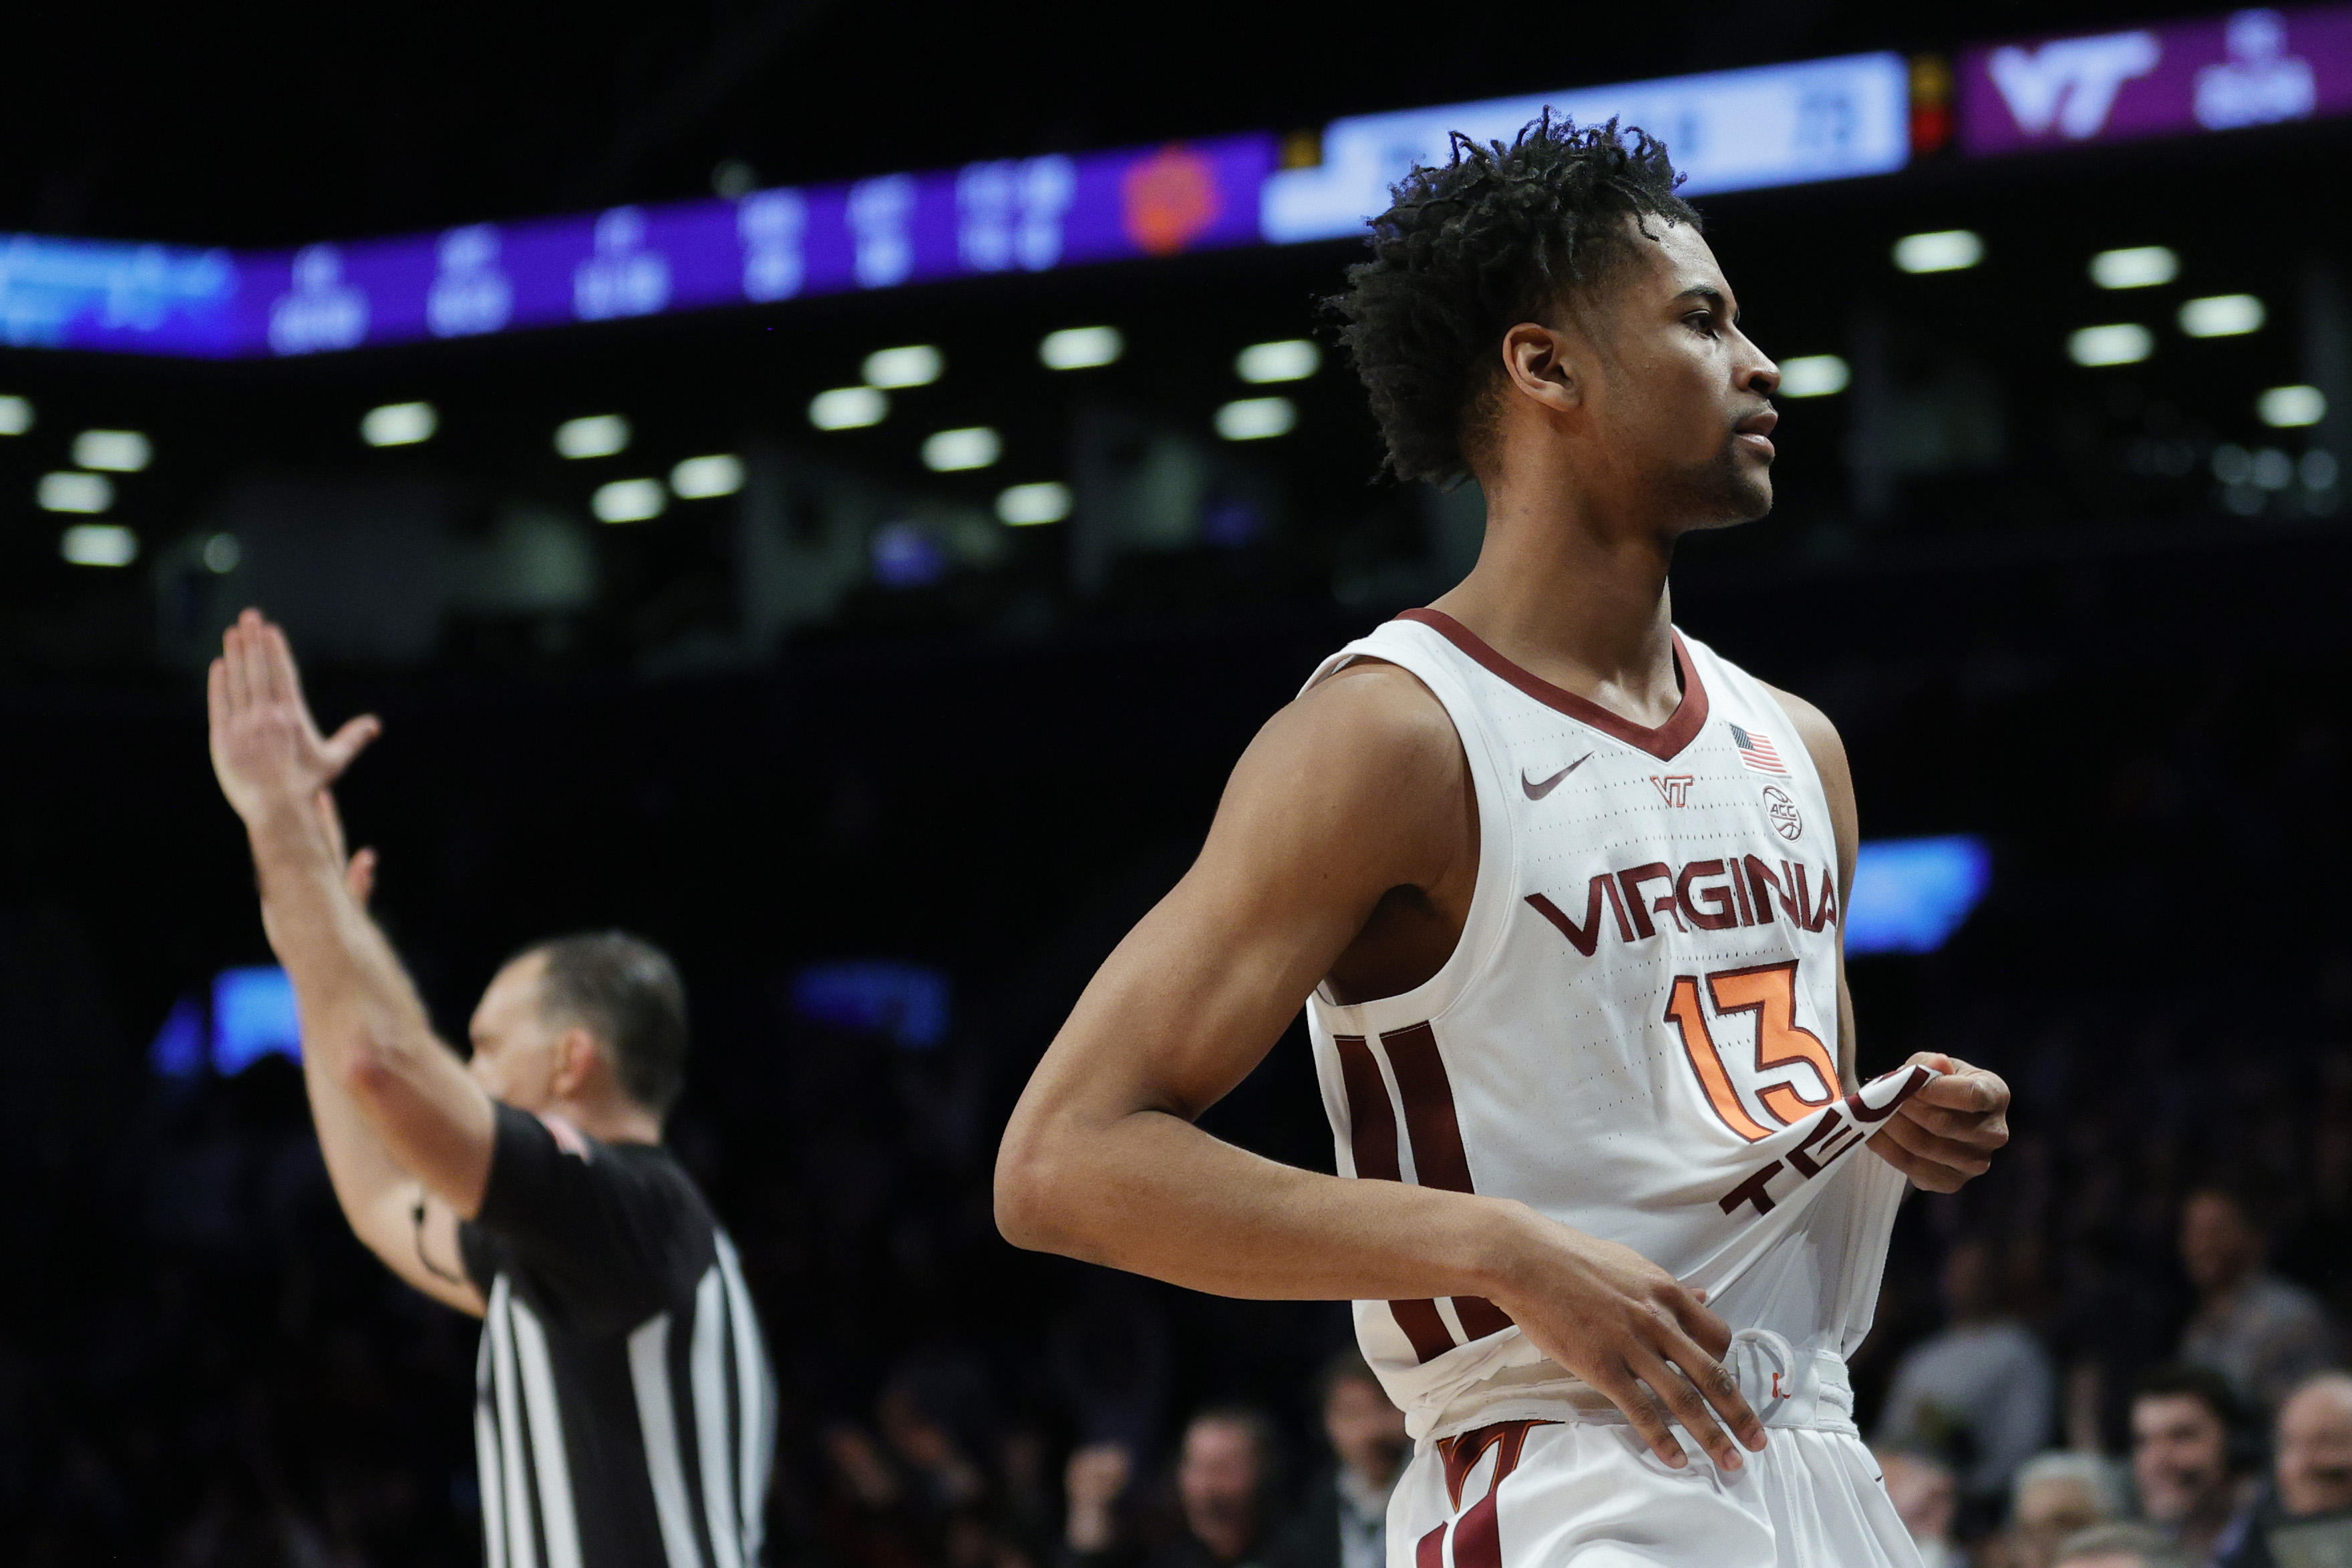 Darius Maddox reacts after his game-winning three-point basket during overtime against the Clemson Tigers in the 2022 Men’s ACC Basketball Tournament - Second Round at Barclays Center on March 09, 2022 in the Brooklyn borough of New York City.